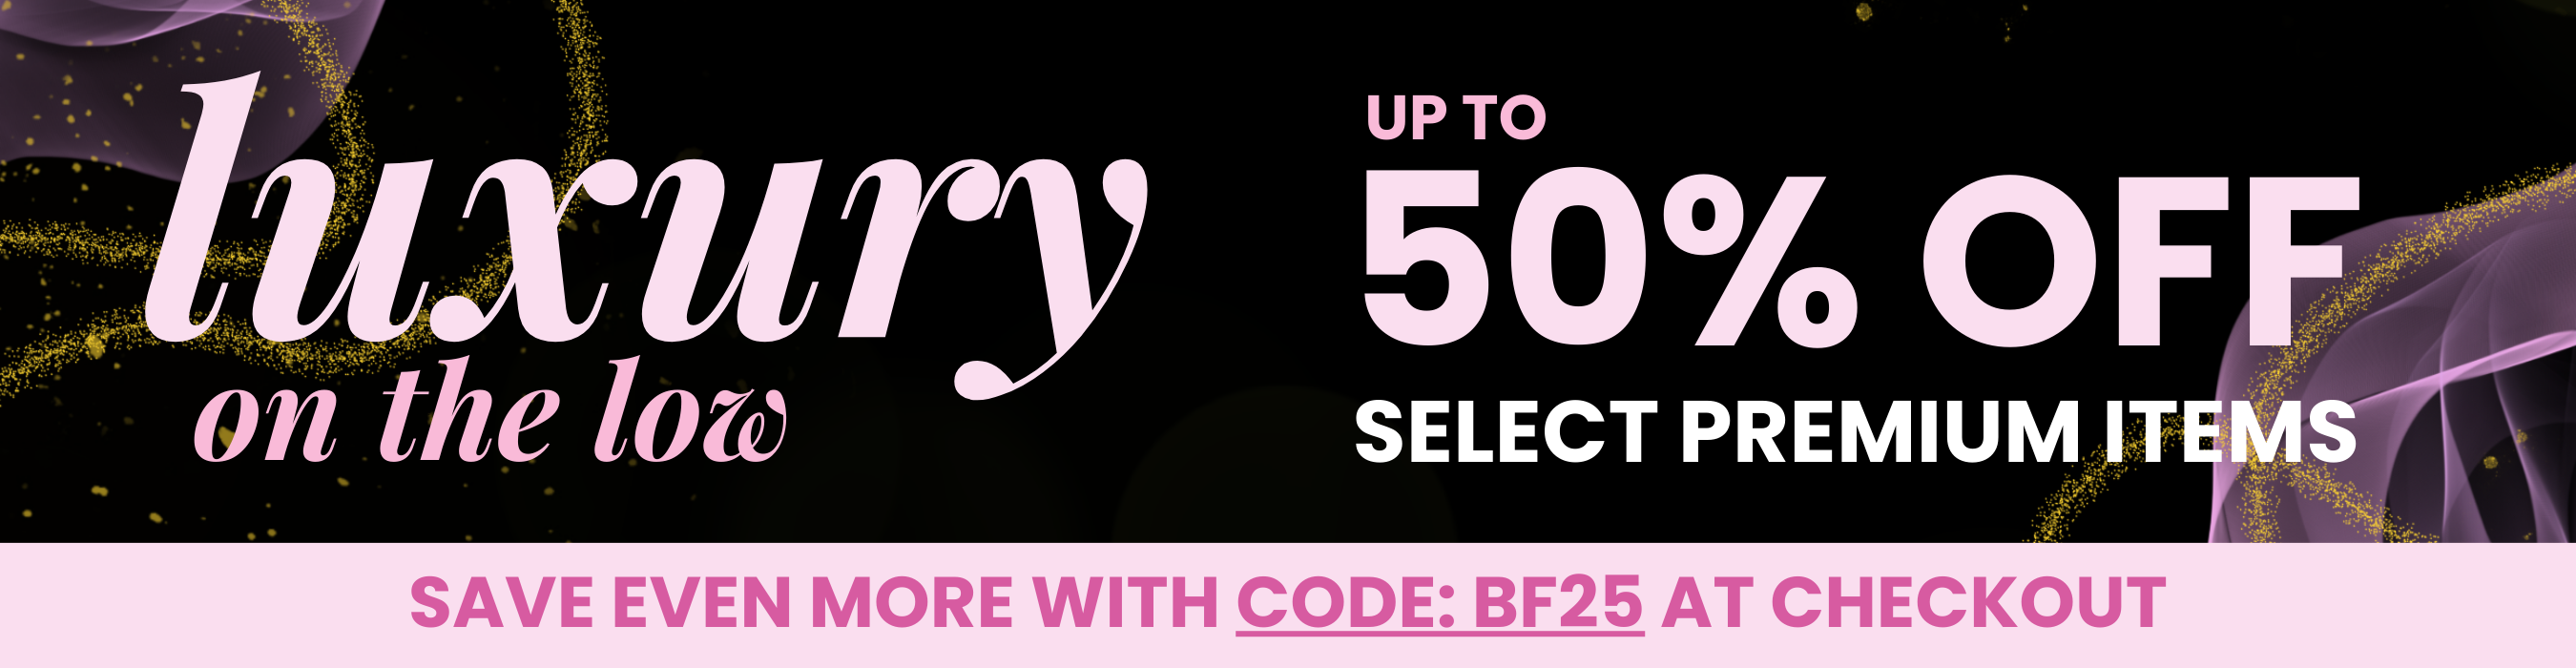 Shop our luxury toys on the low and save up to 50% OFF select premium items. Save even more with code: BF25 at checkout.